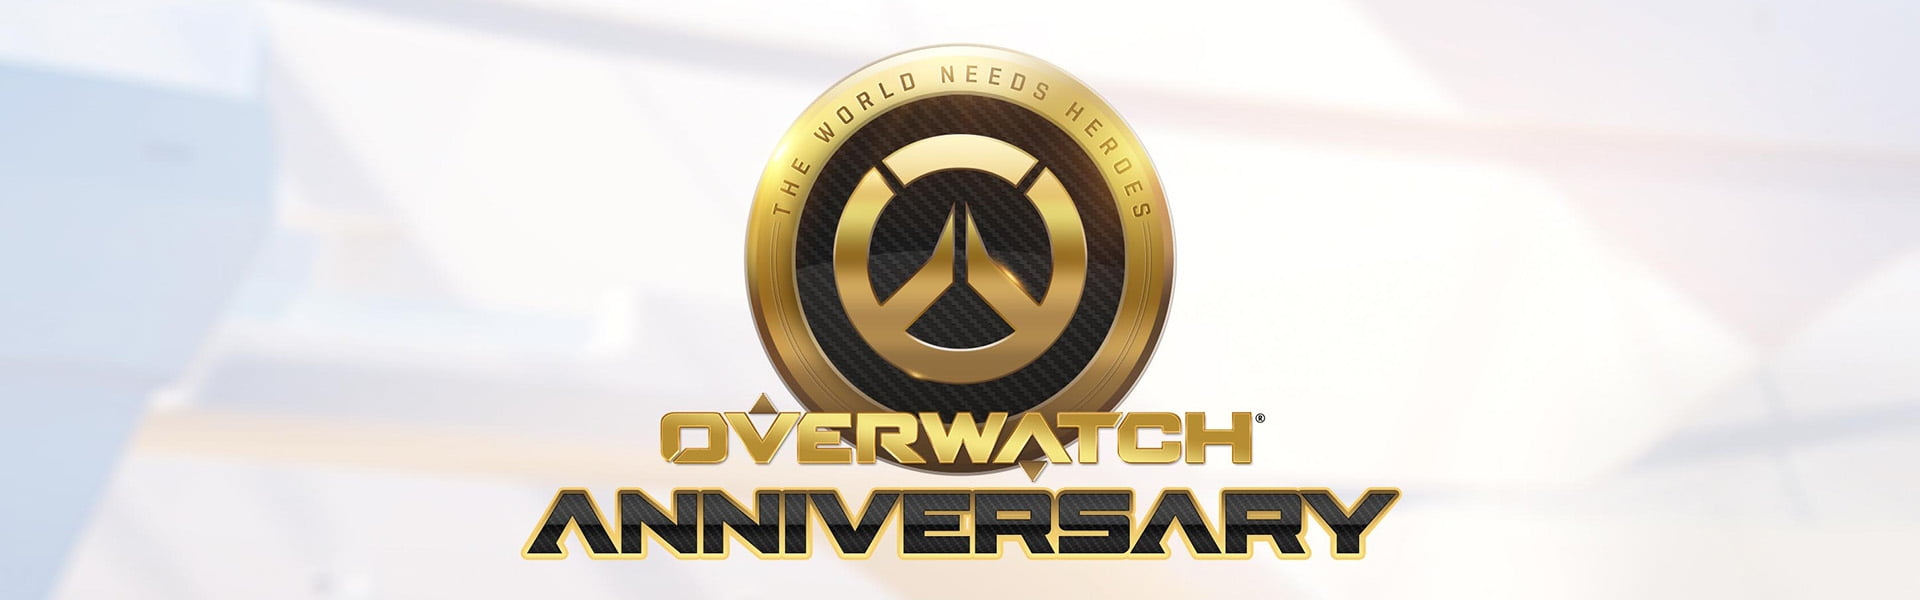 Overwatch Anniversary and Game of the Year Edition! 9